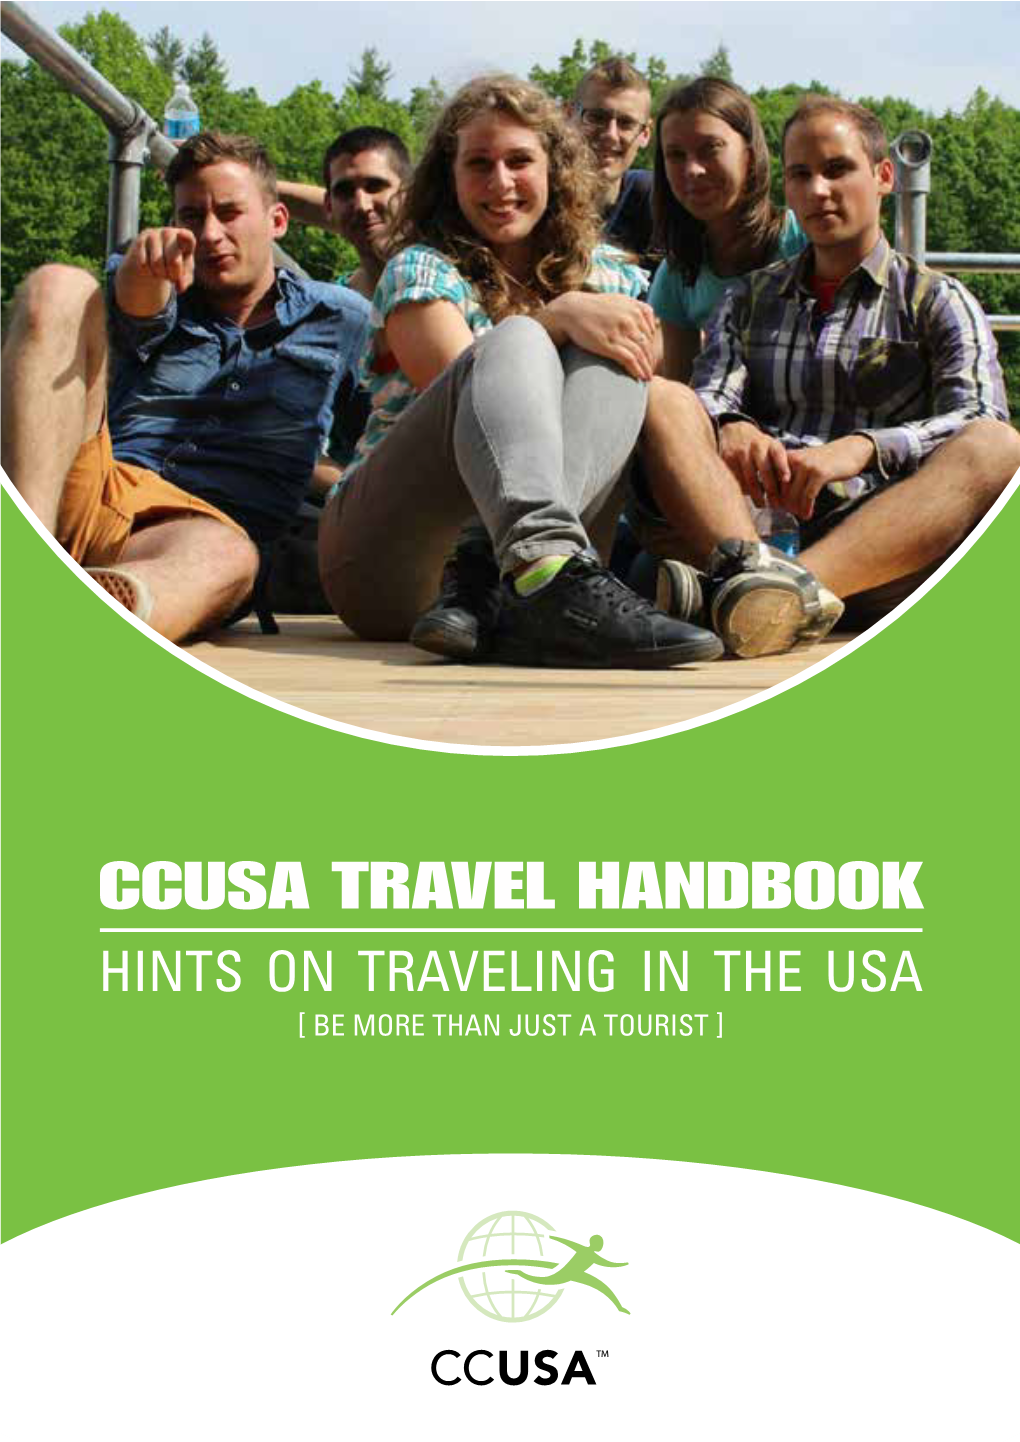 Ccusa Travel Handbook Hints on Traveling in the Usa [ Be More Than Just a Tourist ]